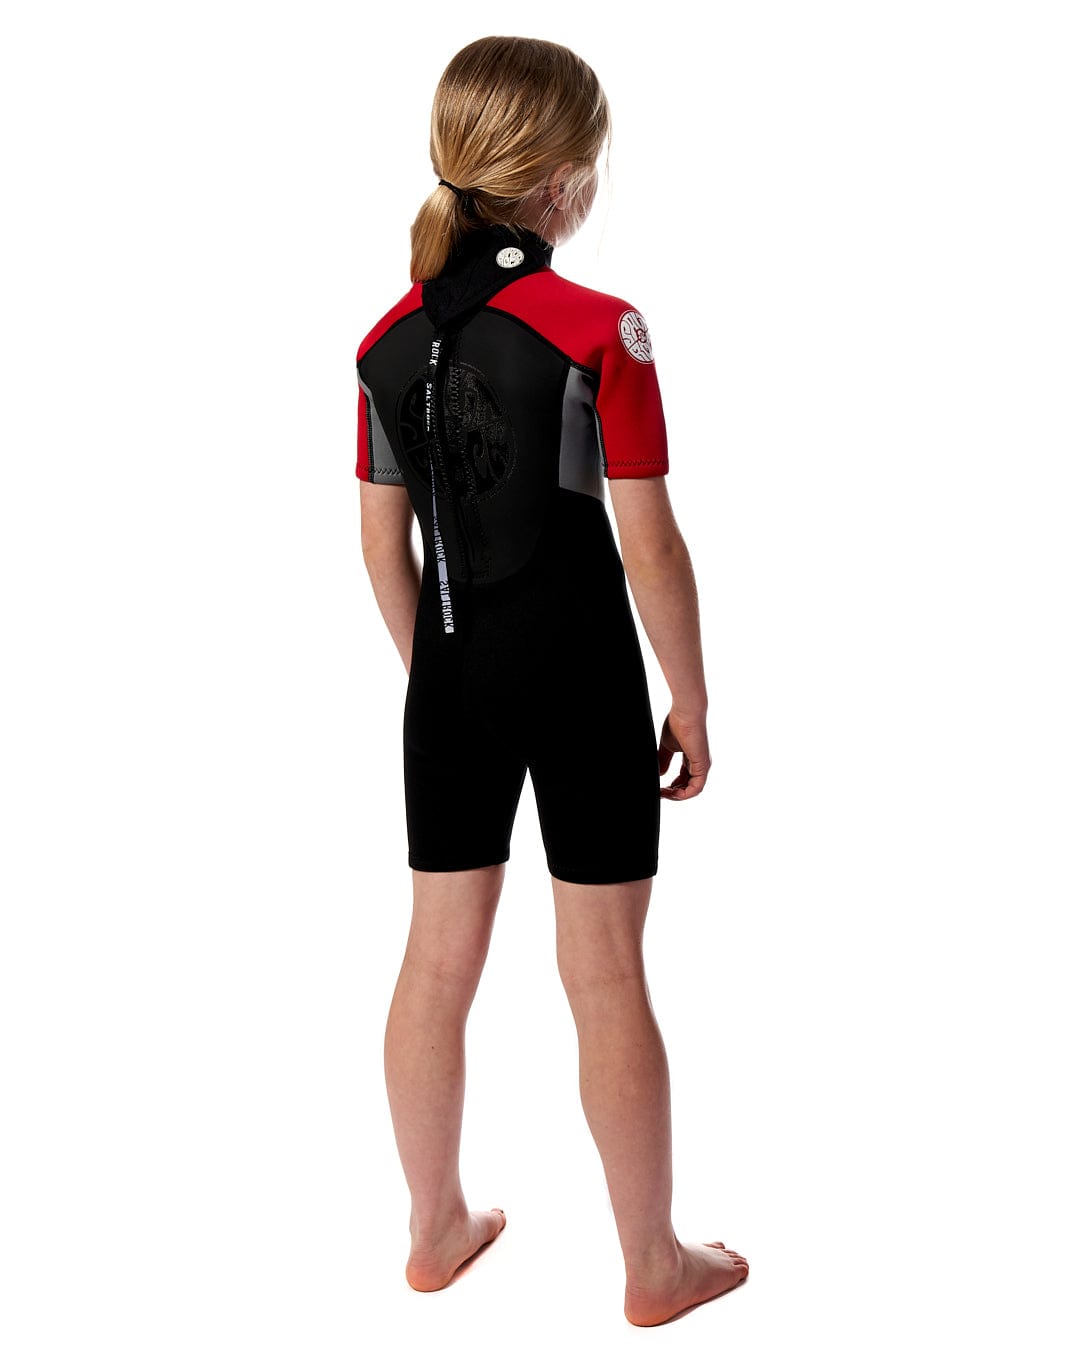 A girl in a black and red Saltrock Core - Boys 3/2 Shortie Wetsuit at the beach.